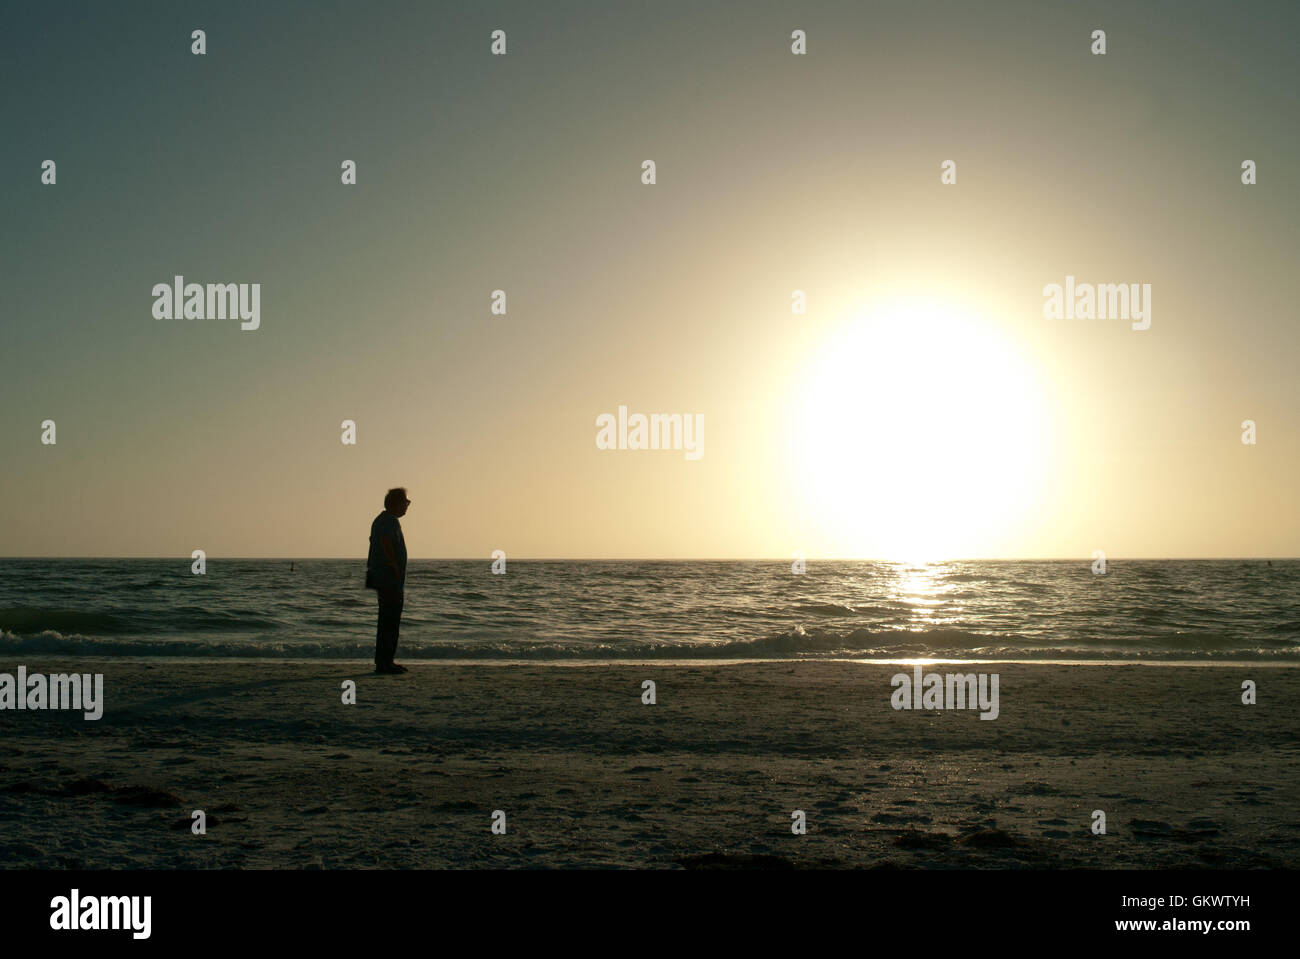 A man stands at the seashore on the Gulf of Mexico backlit by the setting sun. Stock Photo